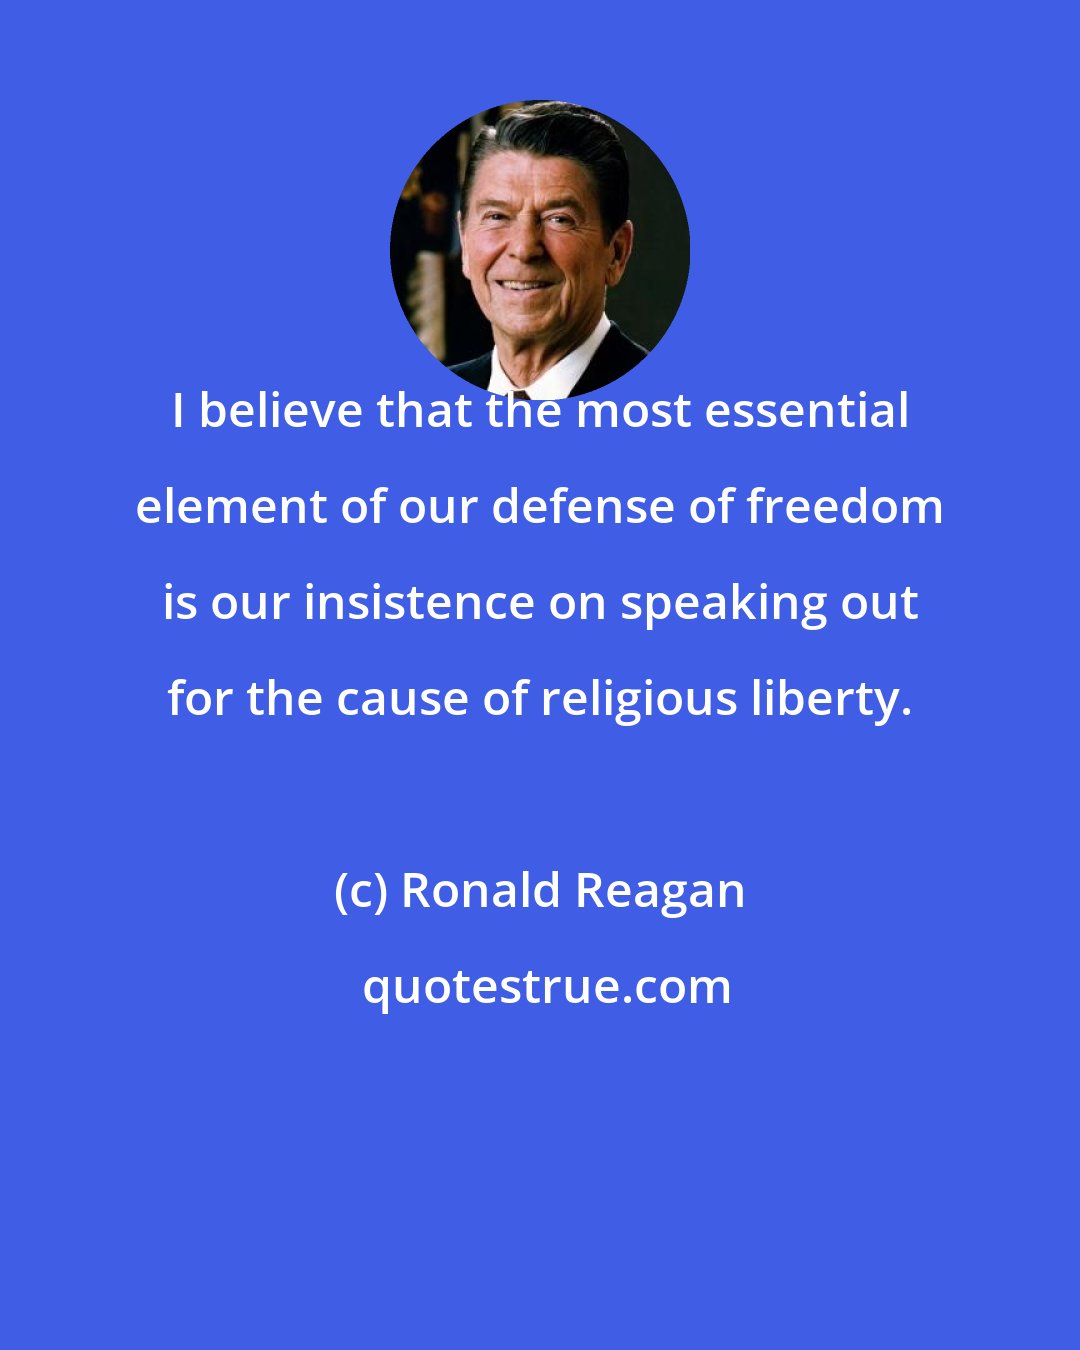 Ronald Reagan: I believe that the most essential element of our defense of freedom is our insistence on speaking out for the cause of religious liberty.